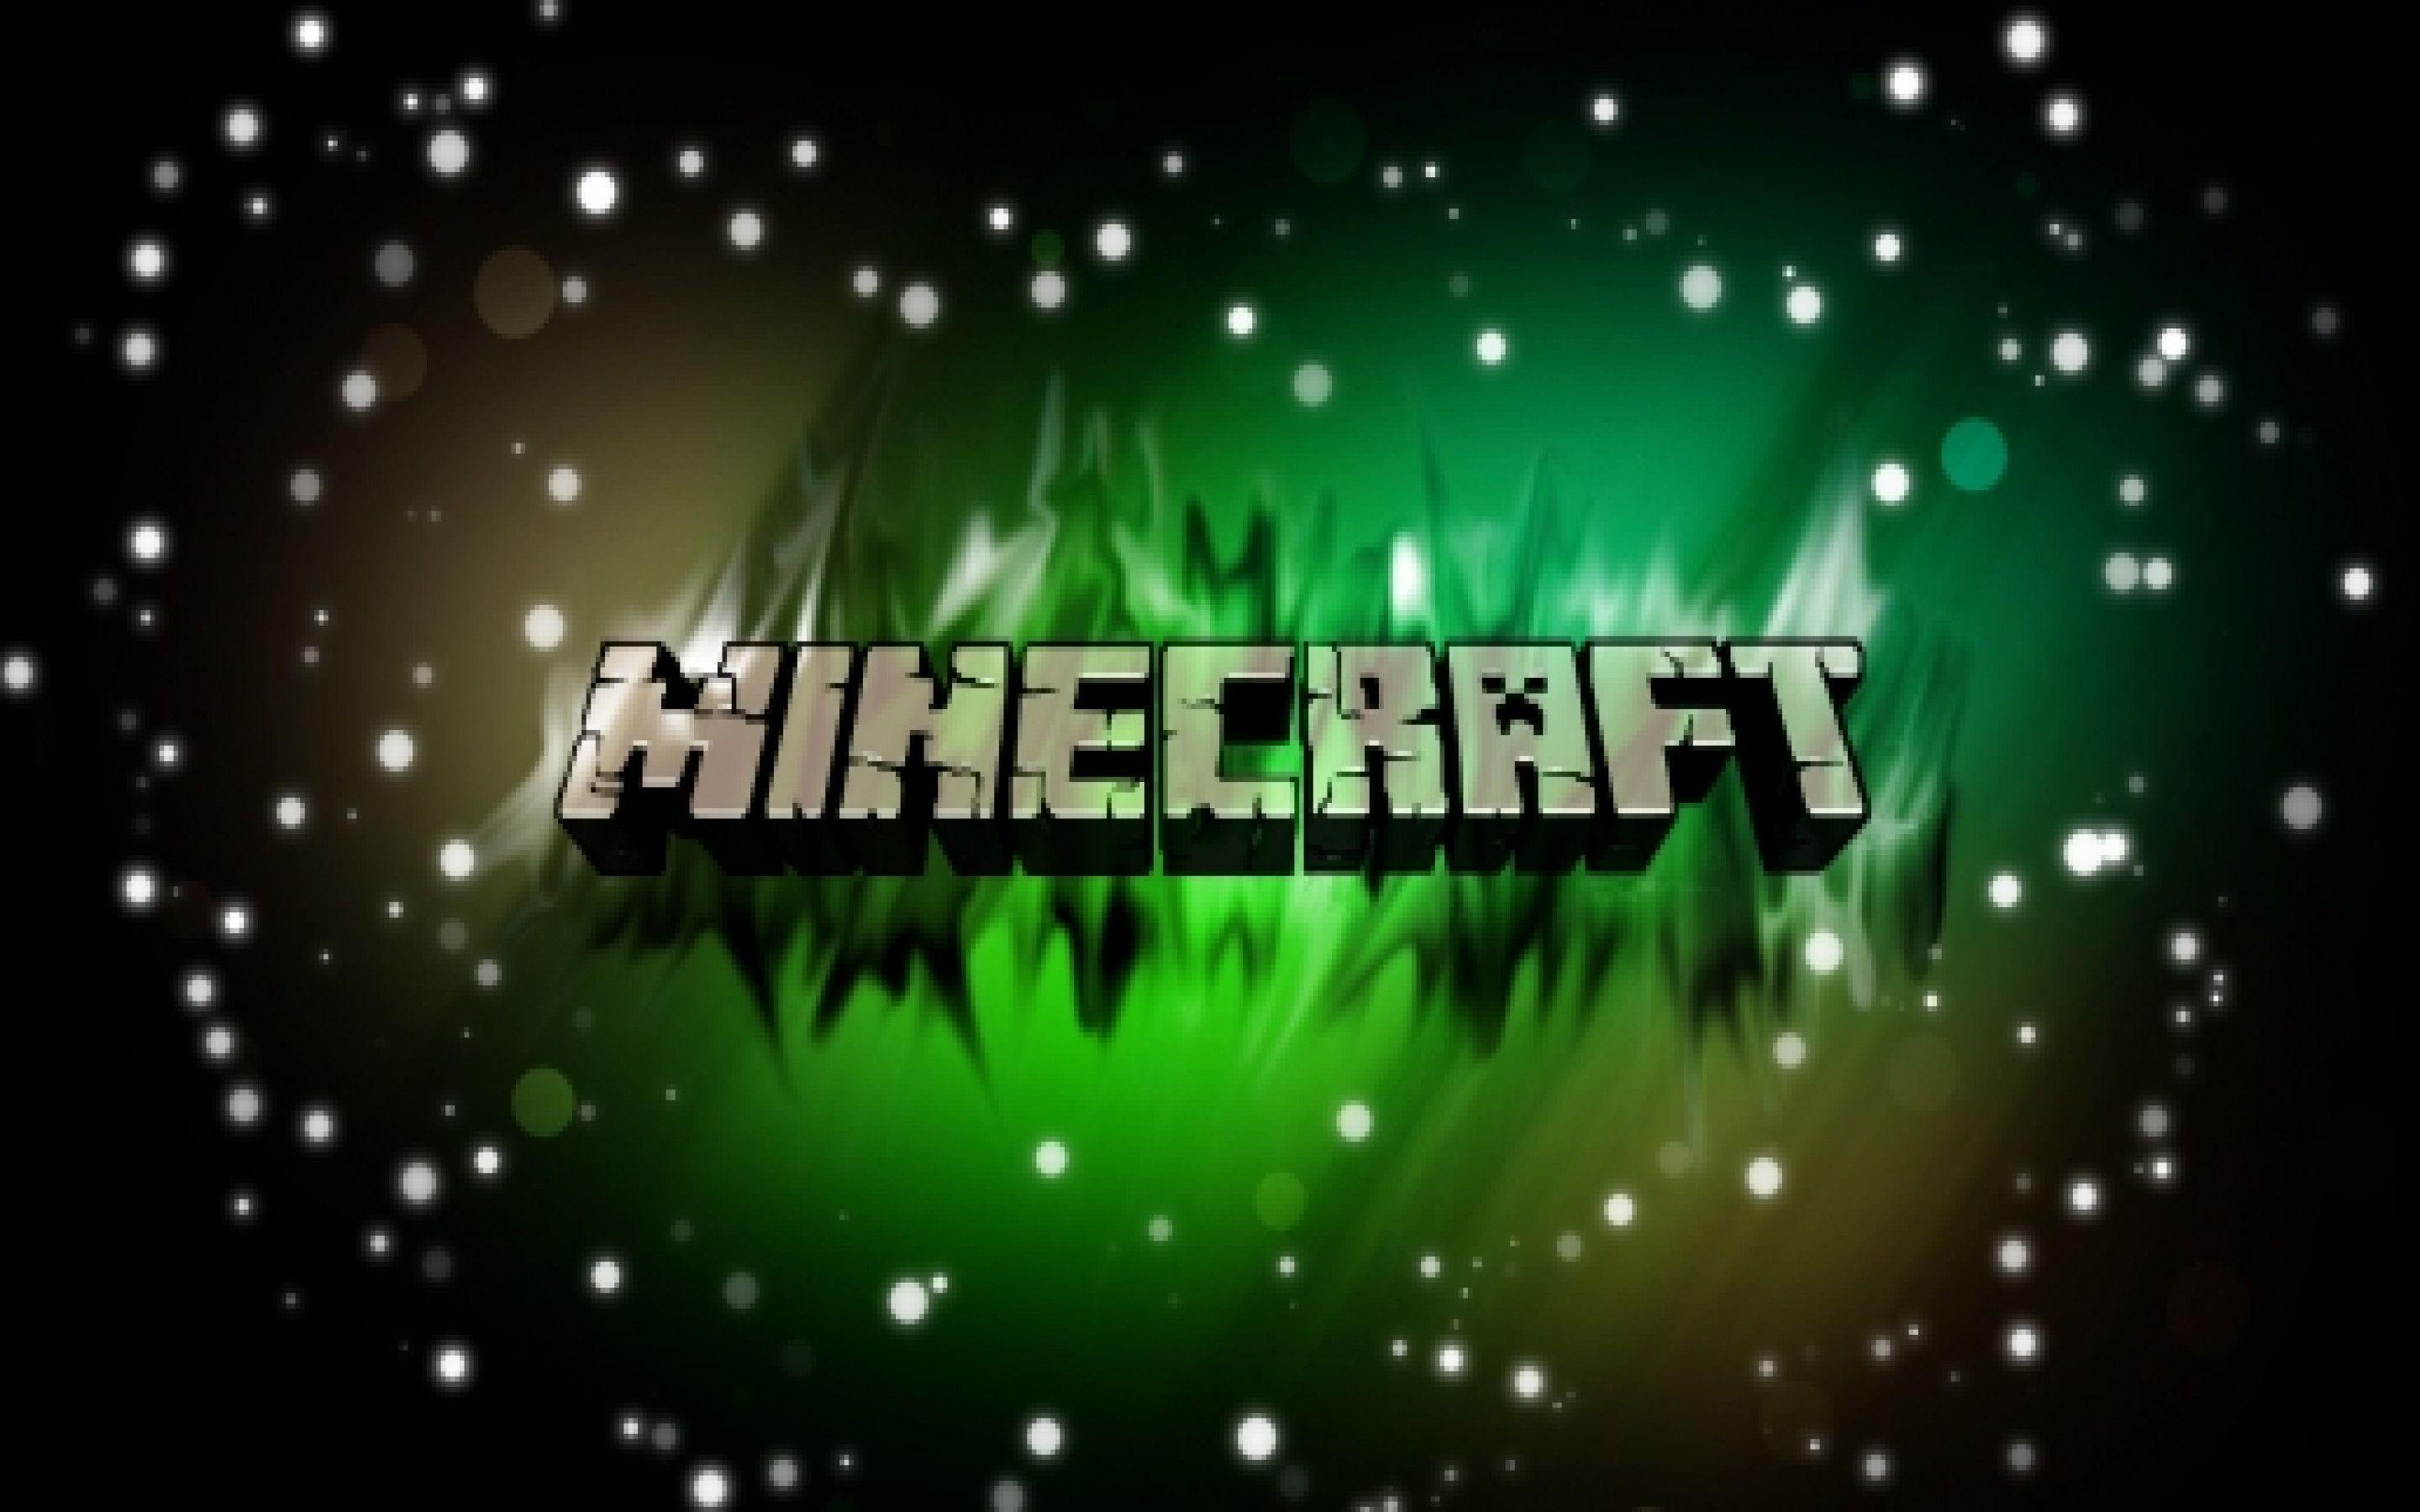 minecraft backgrounds for your computer Wallpapers